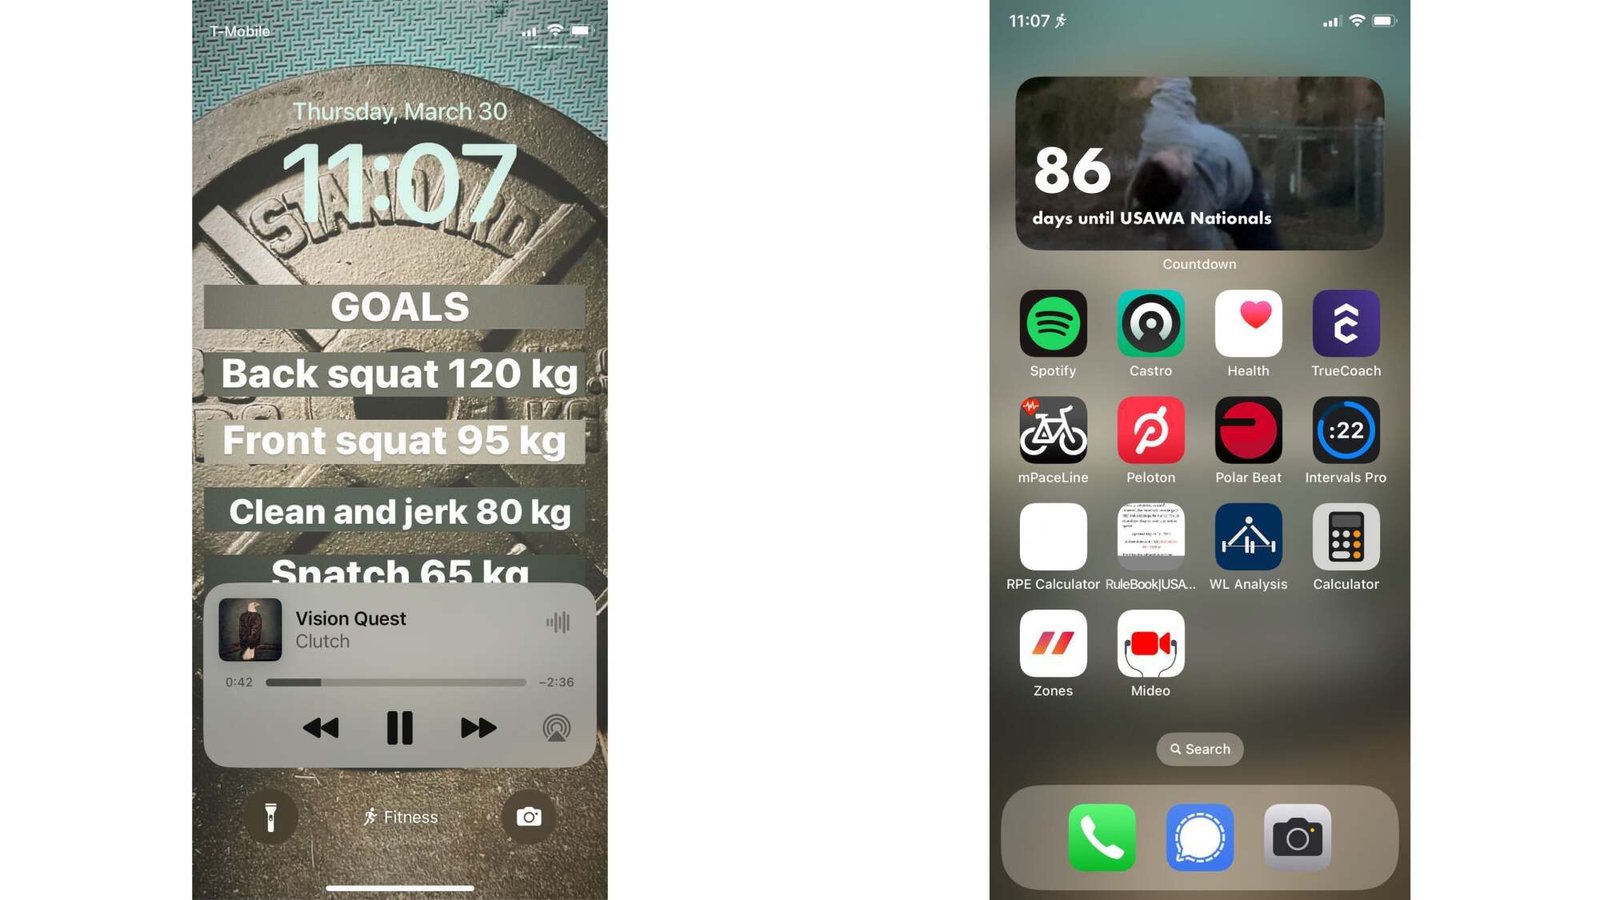 Fitness Mode lock screen with goals on it, and the matching home screen.